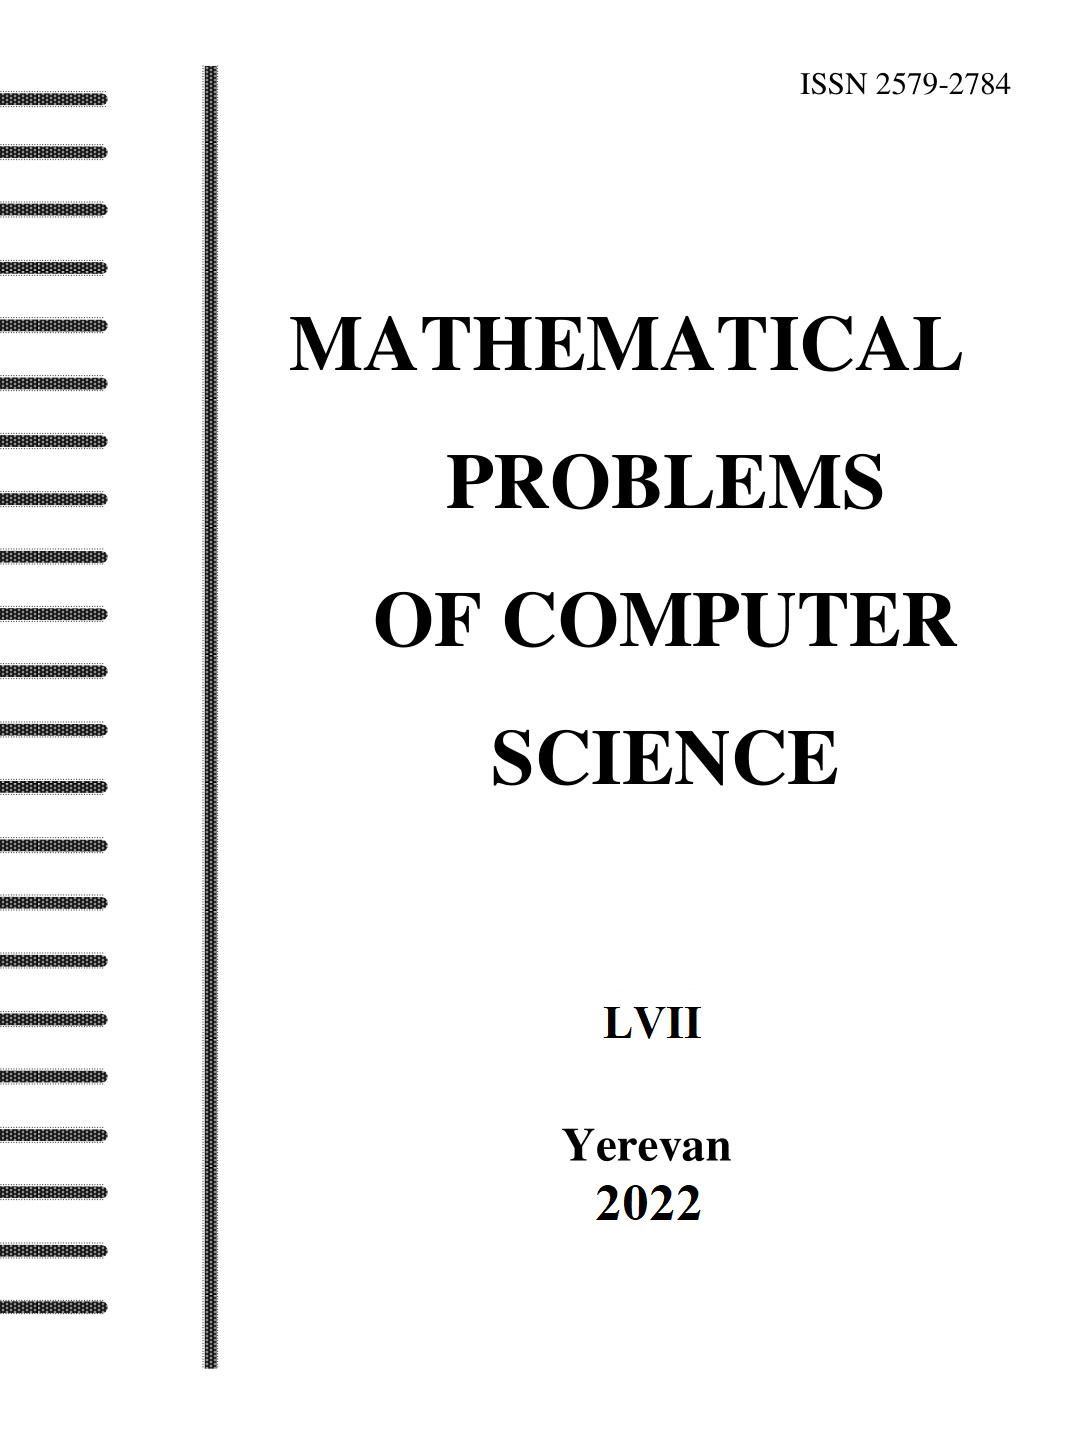 					View Vol. 57 (2022): Mathematical Problems of Computer Science
				